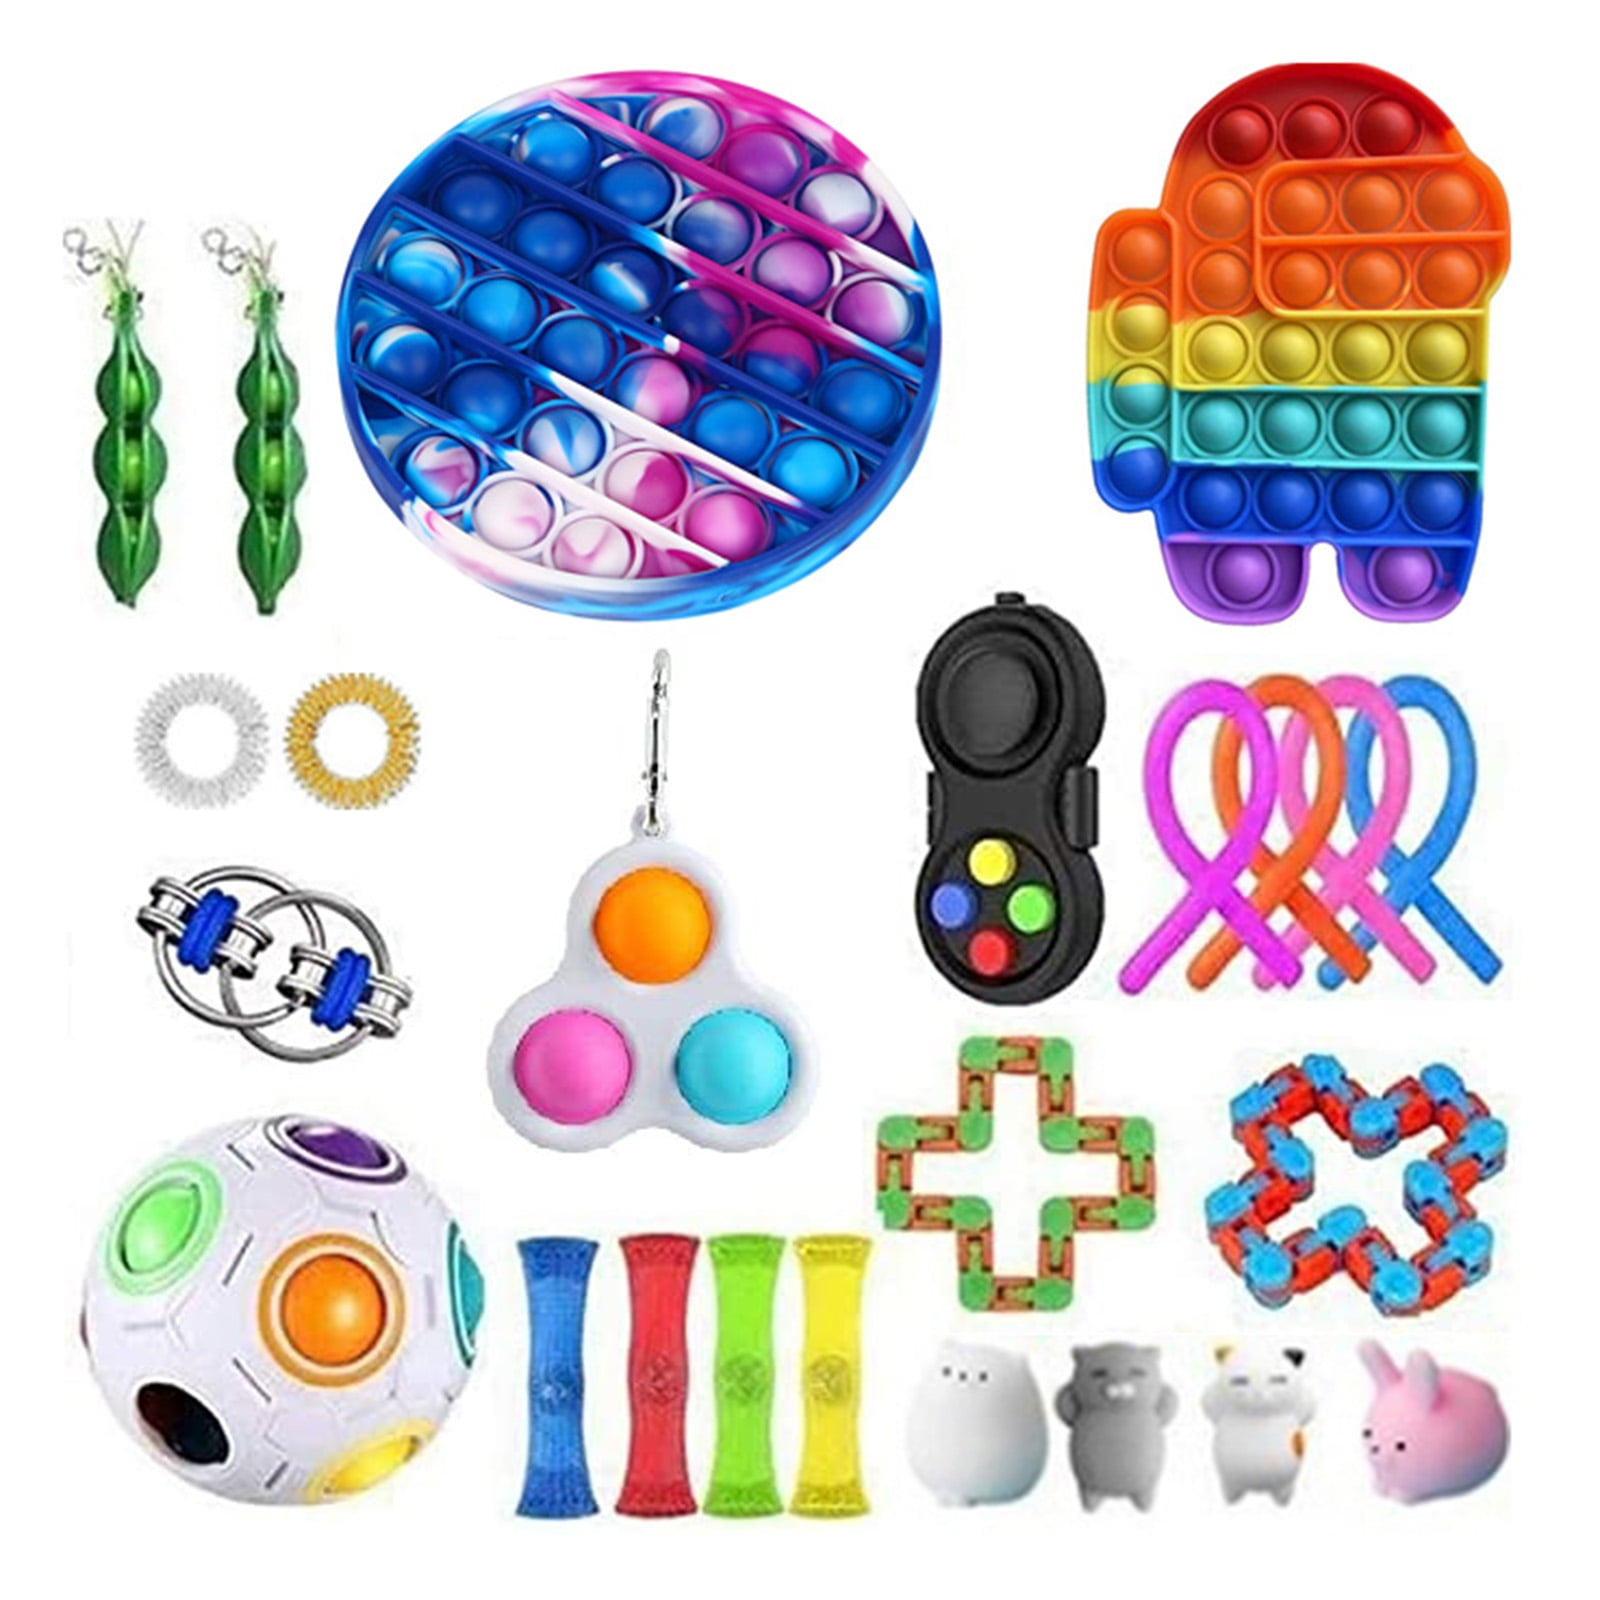 Details about   Among  Fidget Sensory Kids Hand Toy Running Stress Relief Special Needs